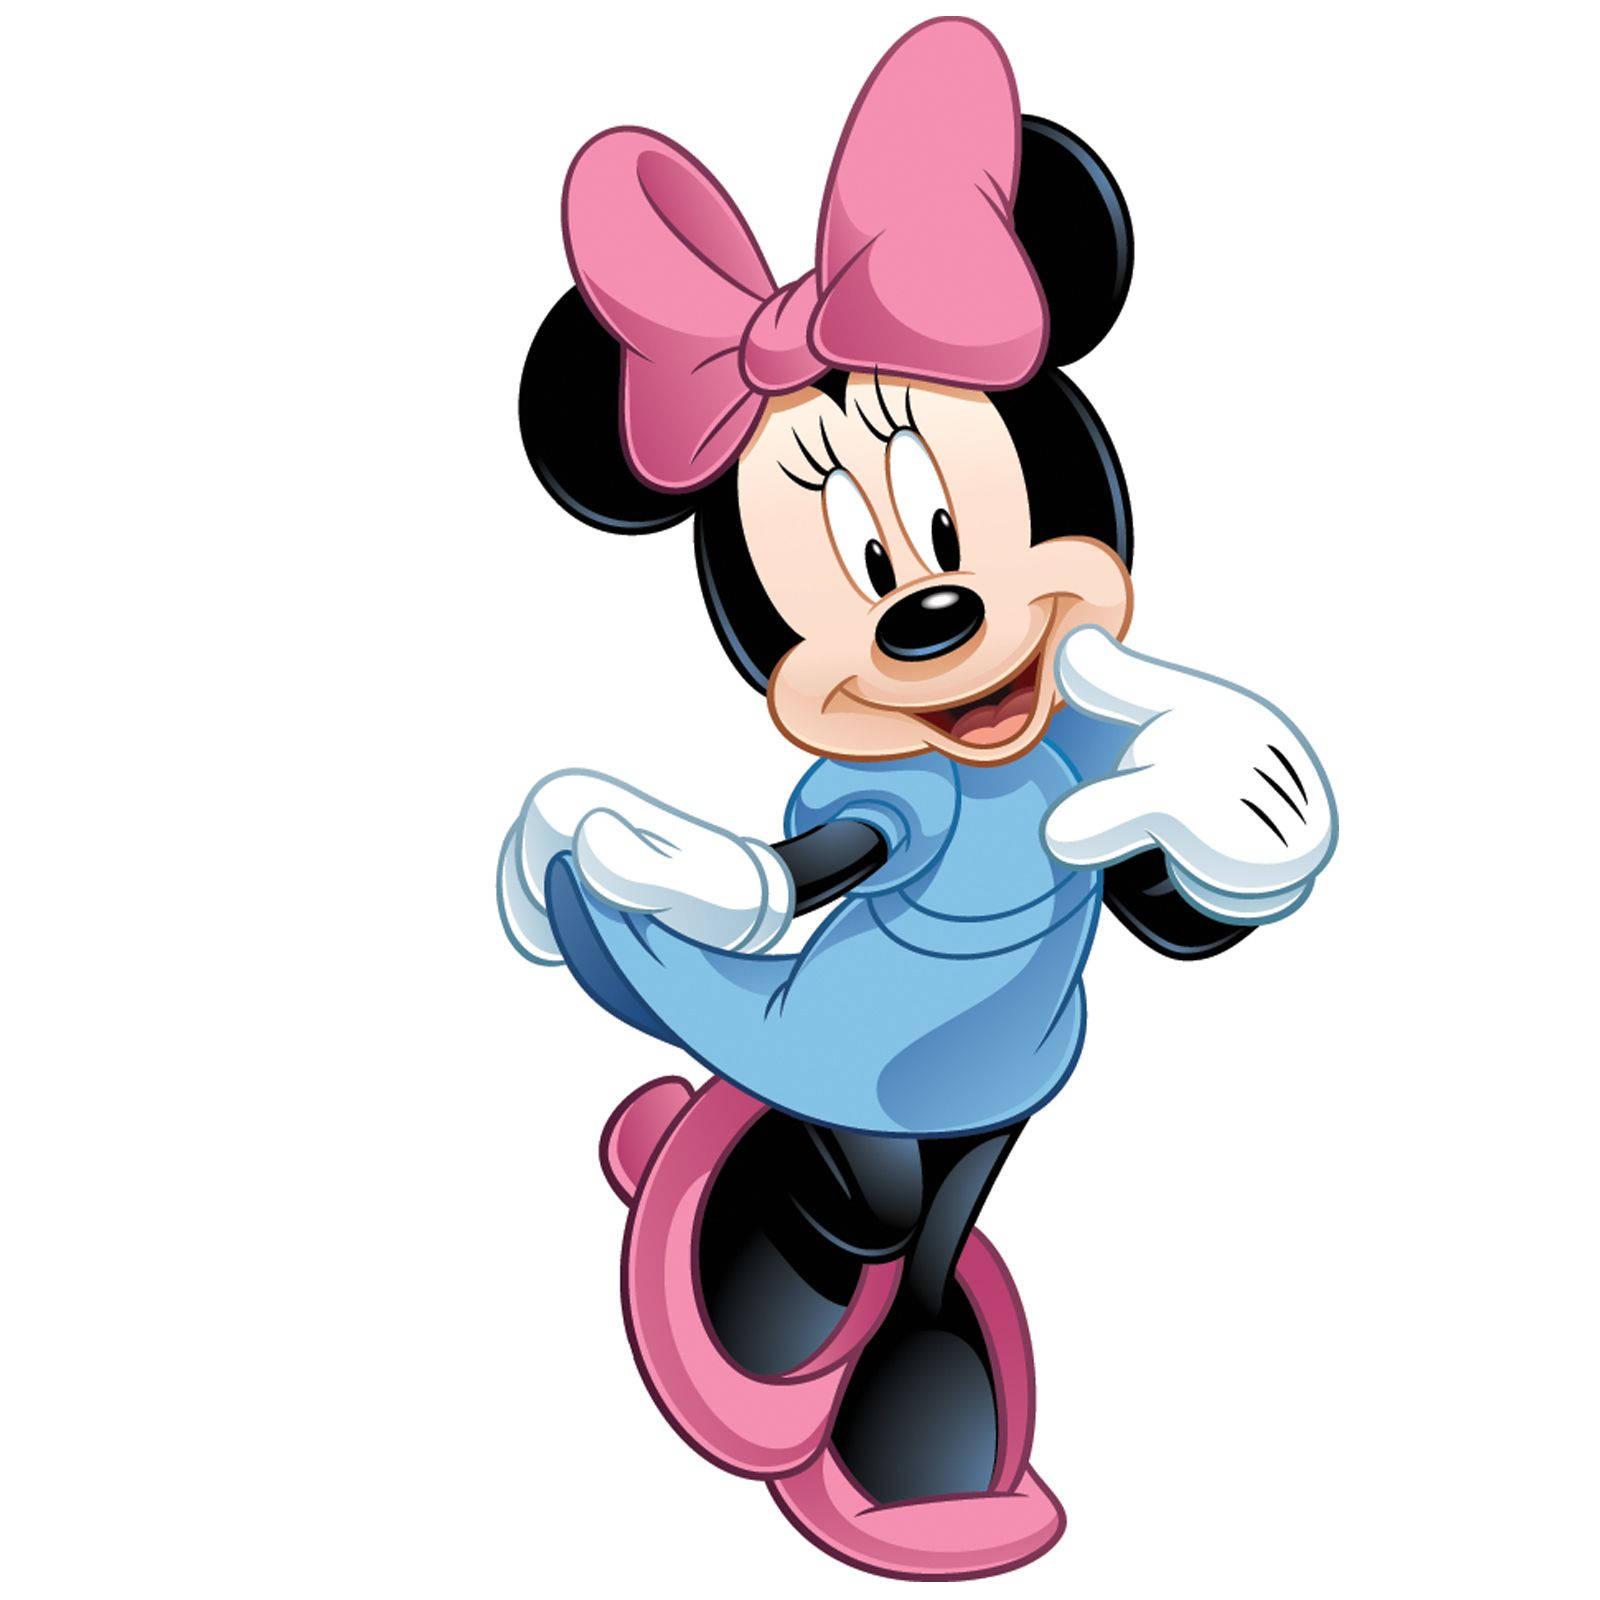 Minnie Mouse Cute Pose Wallpaper